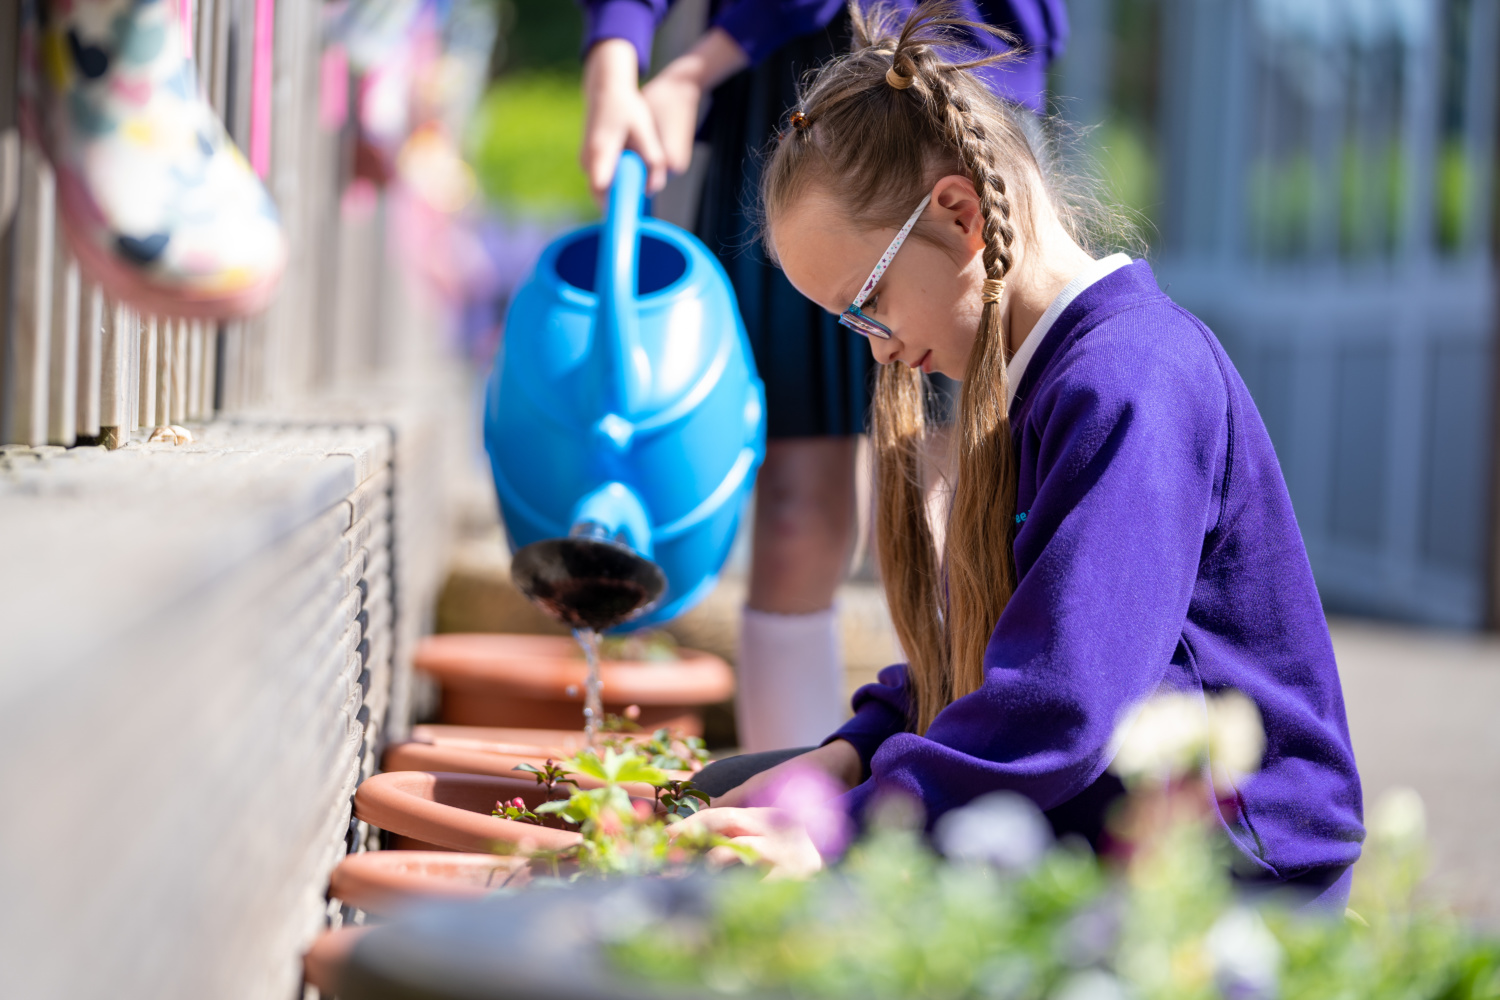 A young girl is seen dressed in her academy uniform, gardening in the school outdoor play area, whilst a friend is pictured watering the plant pots nearby.